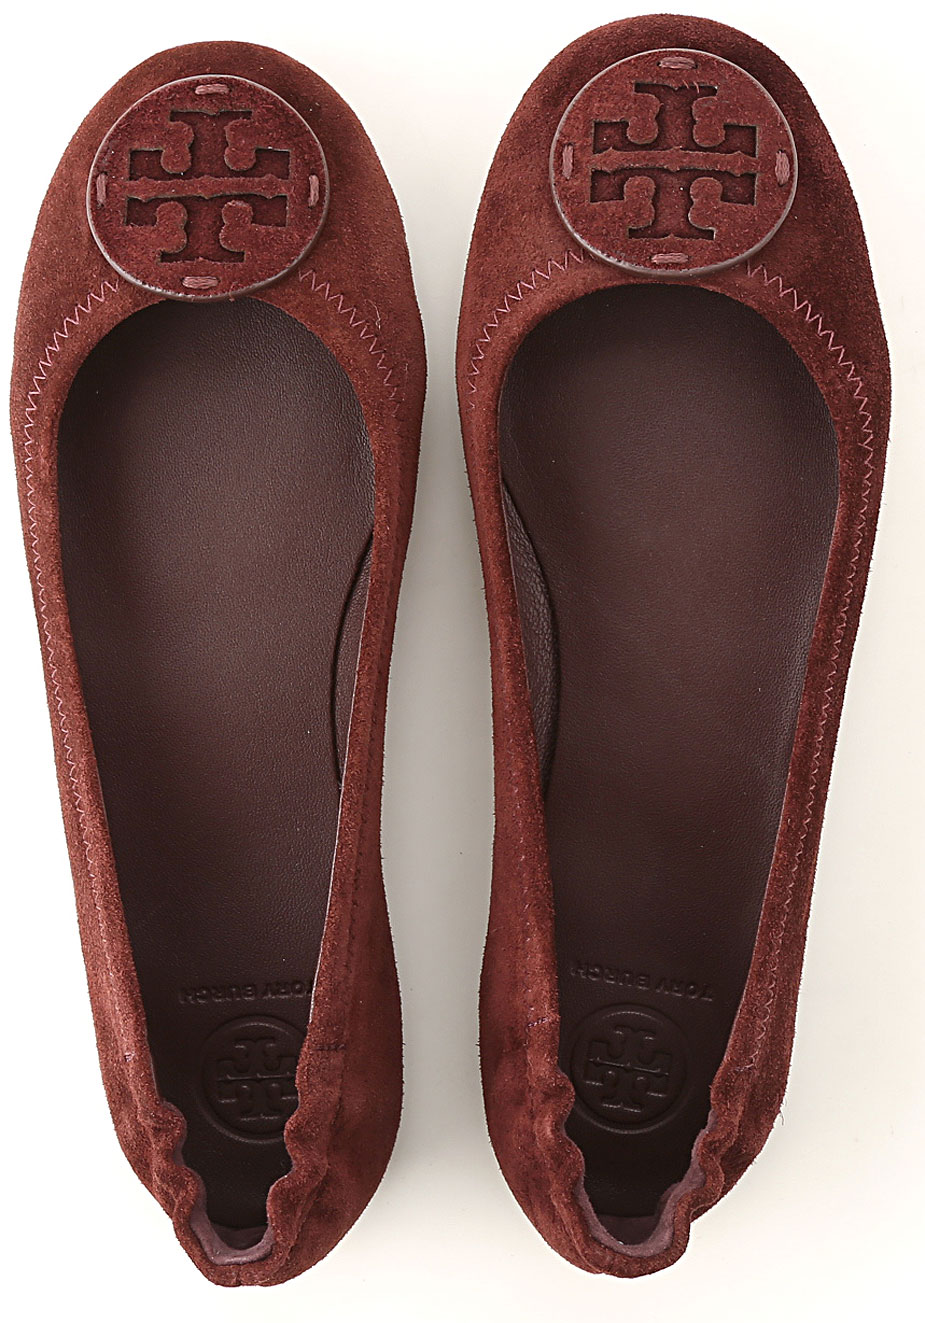 Womens Shoes Tory Burch Style Code 57247 504 7245